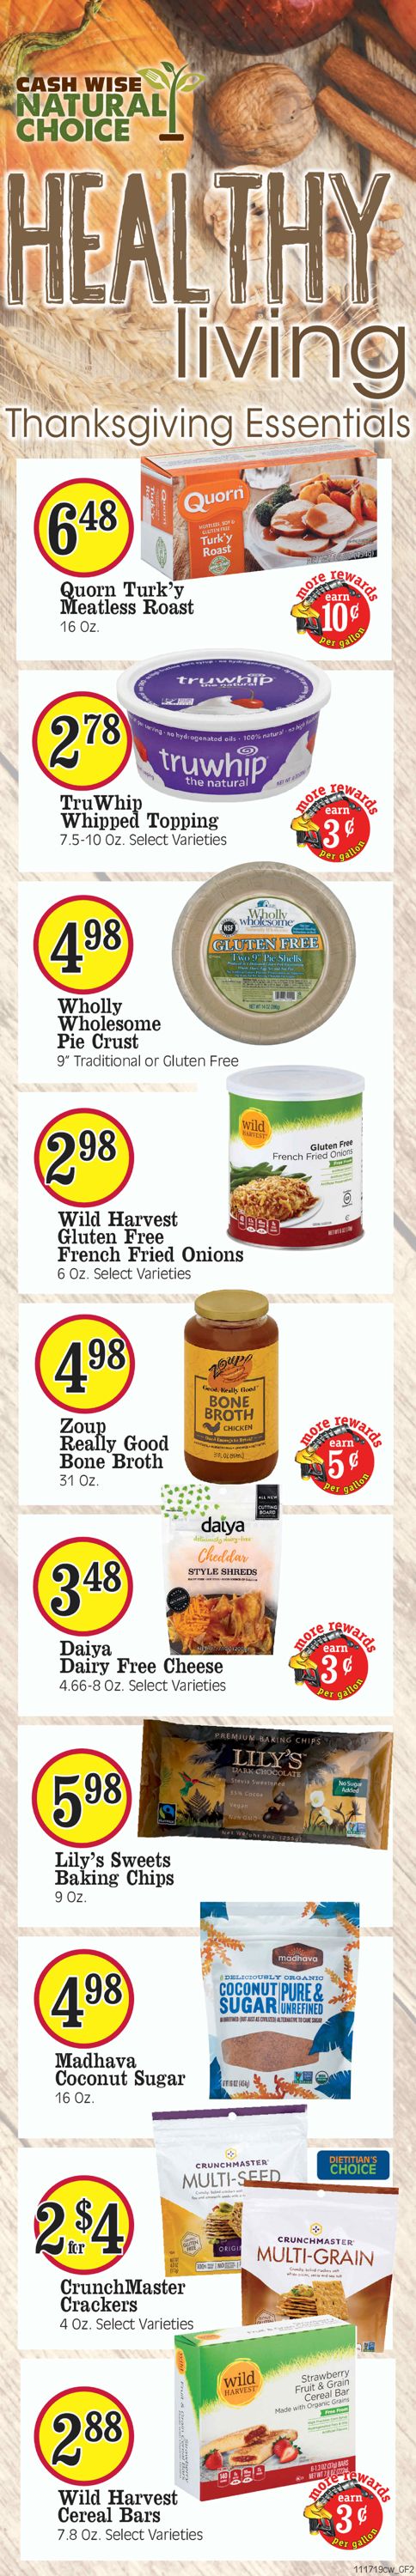 Cash Wise - Thanksgiving Ad 2019 Weekly Ad Circular - valid 11/20-11/26/2019 (Page 8)